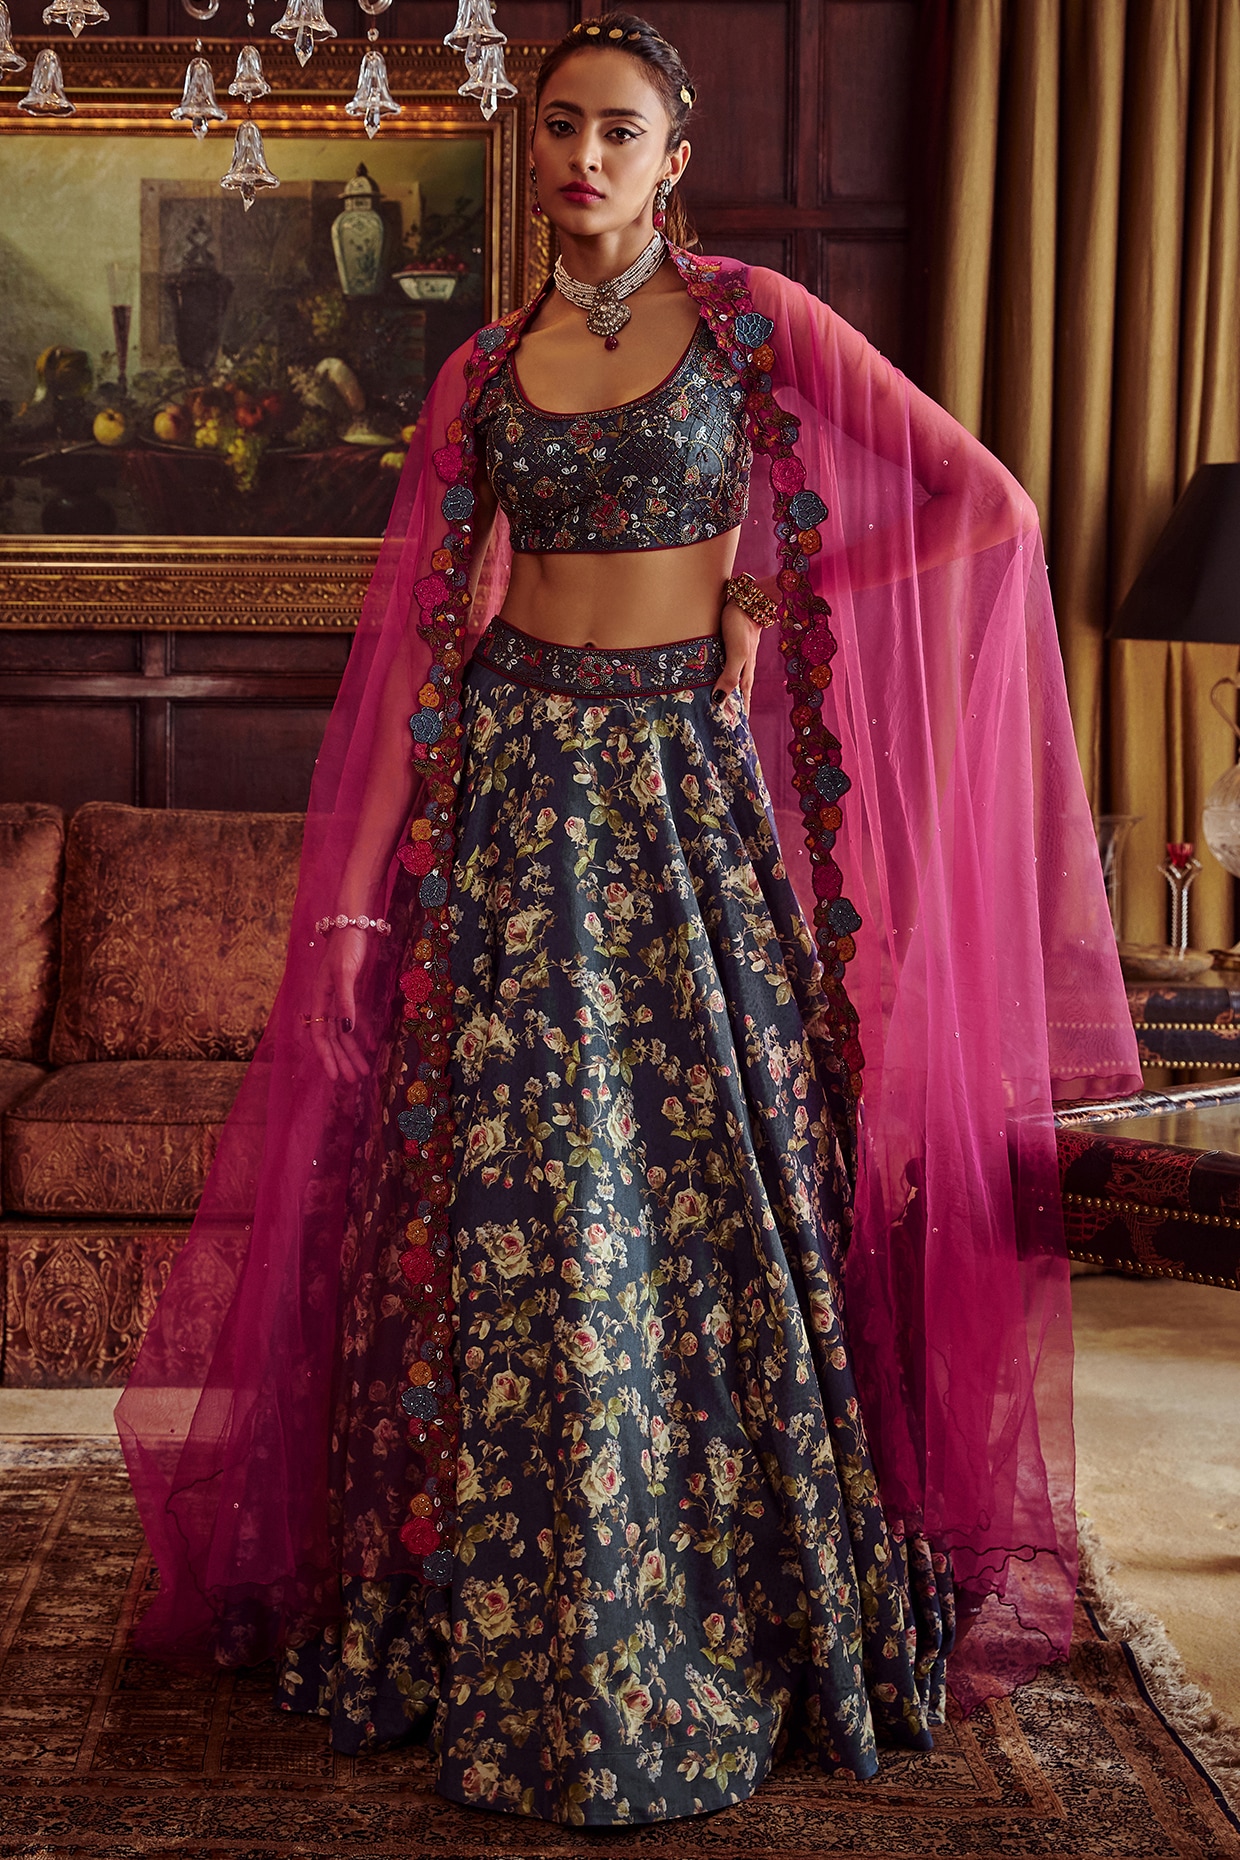 Trending : Hand Painted Lehengas And Sarees To Steal The Show | Lovely  dresses, Gorgeous dresses, Dress materials